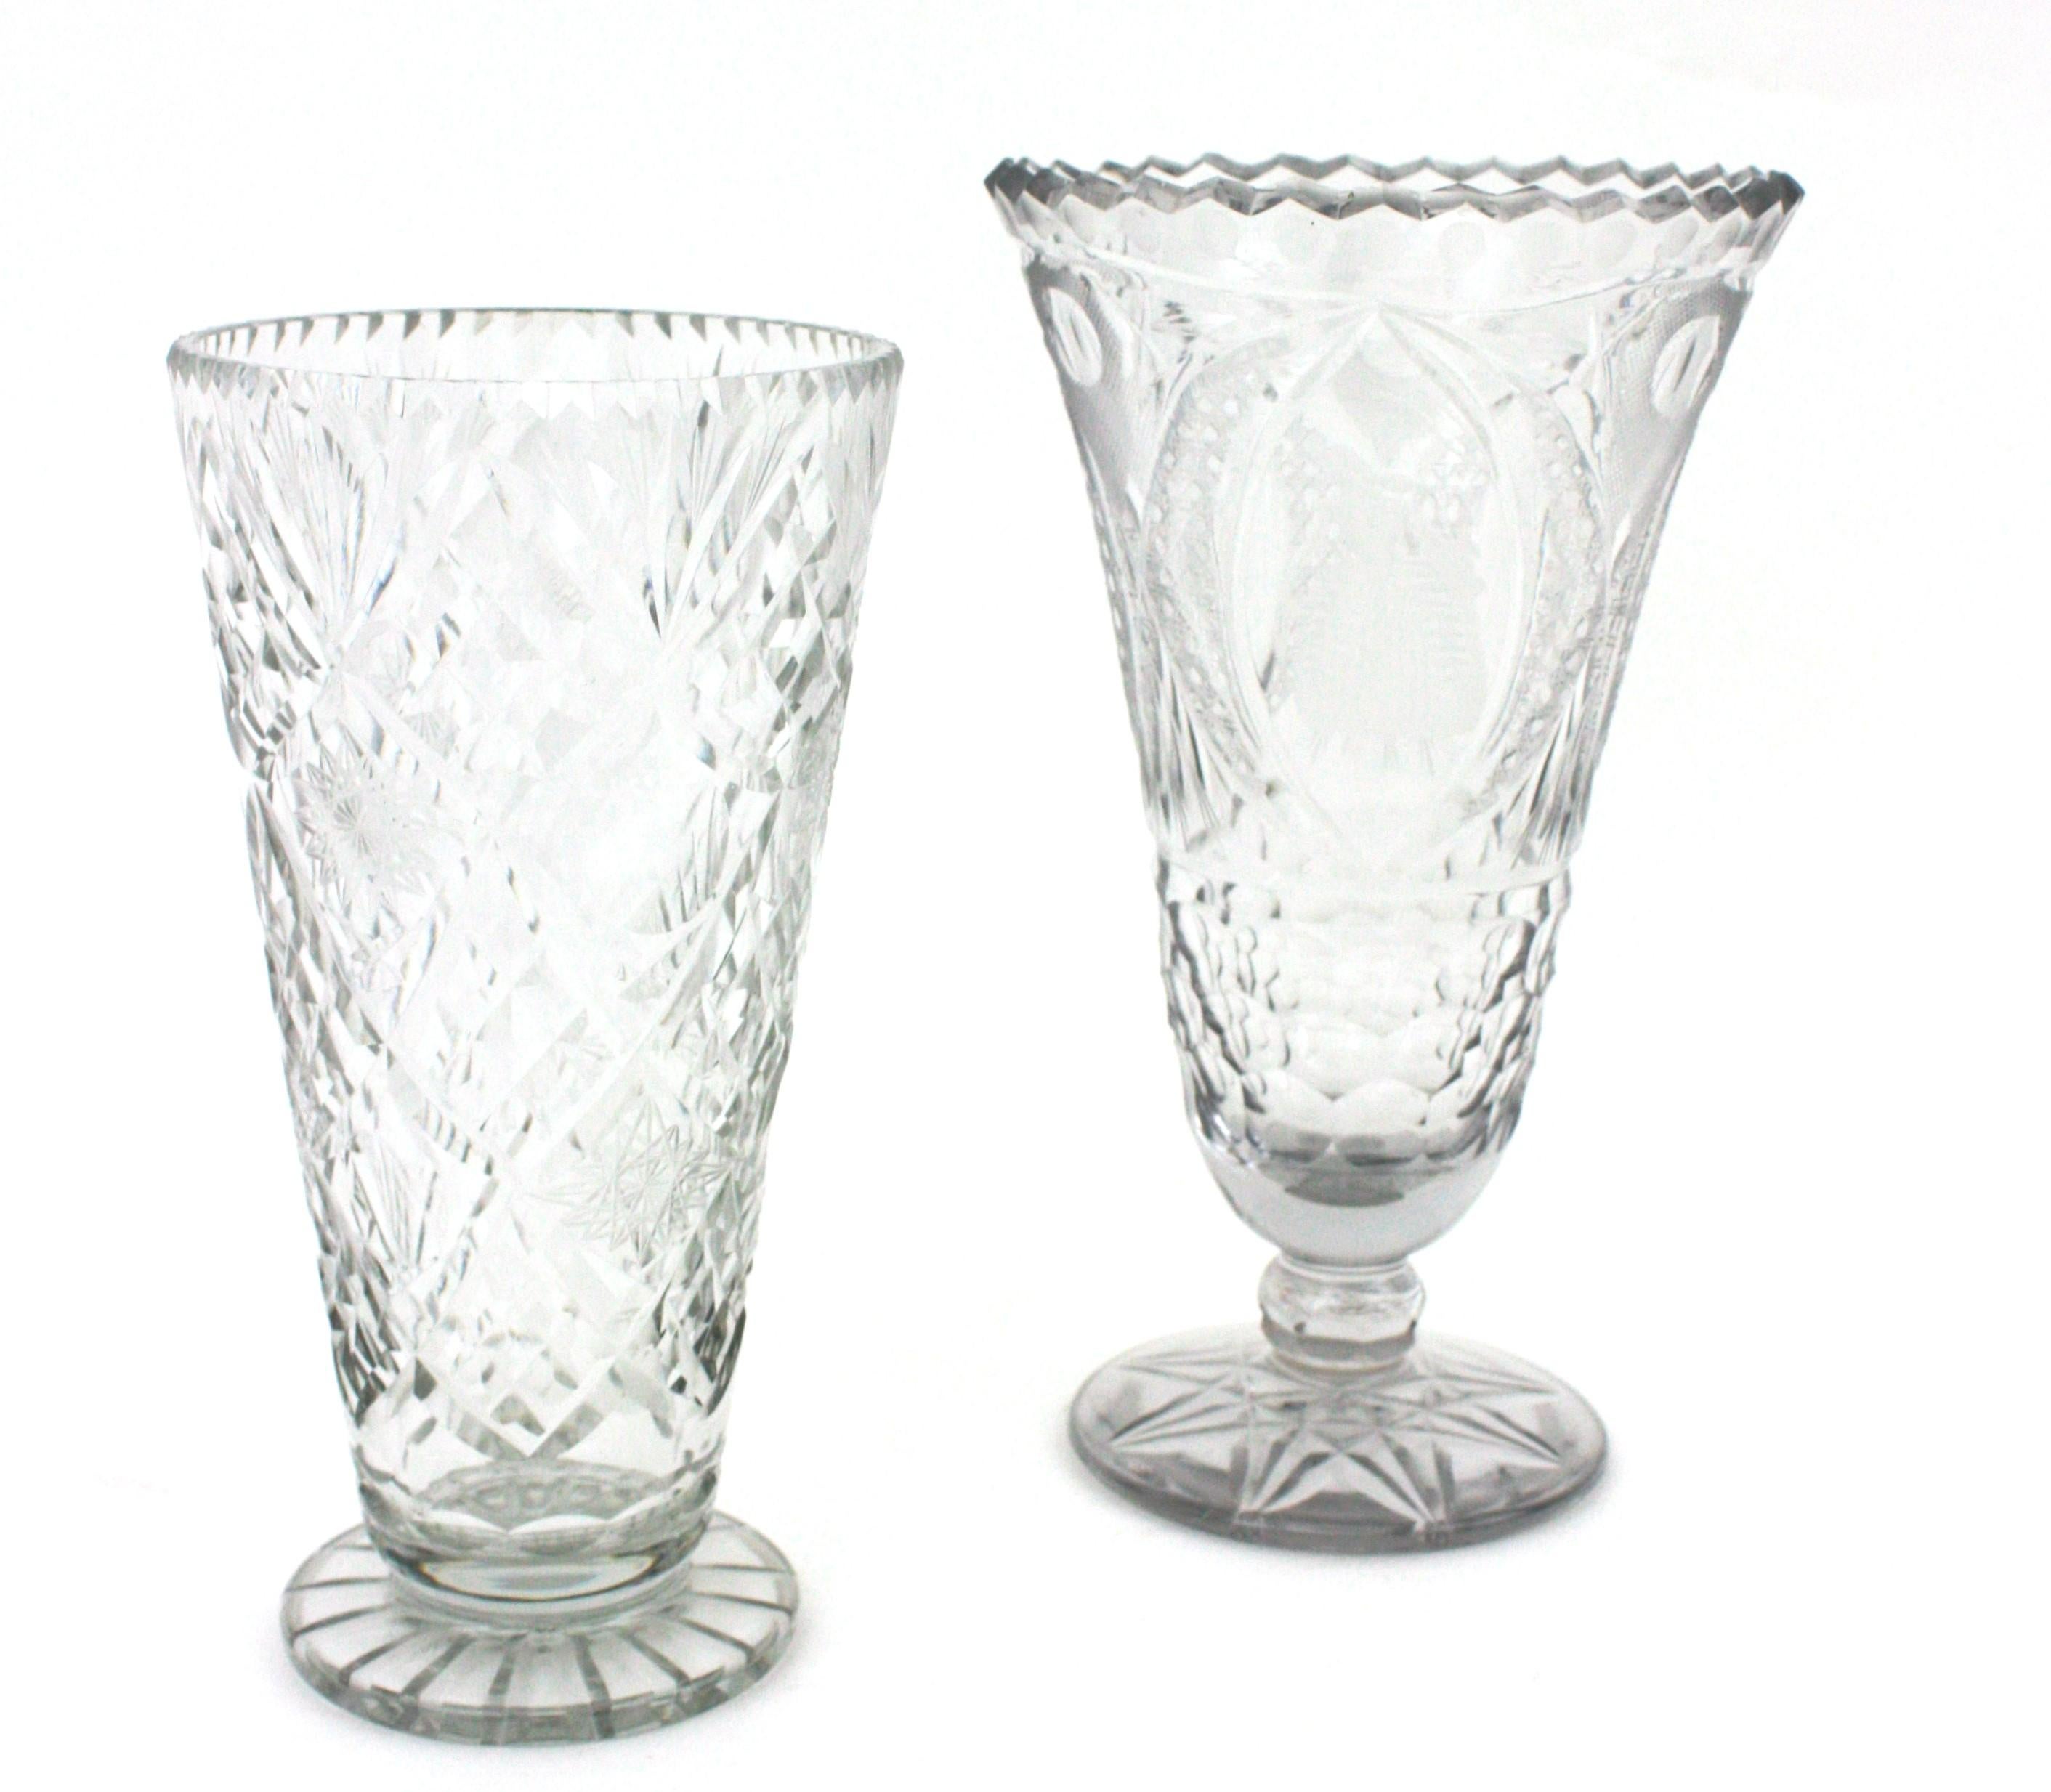 Unmatching Pair of Cut Crystal Vases or Hurricane Candle Holders For Sale 1